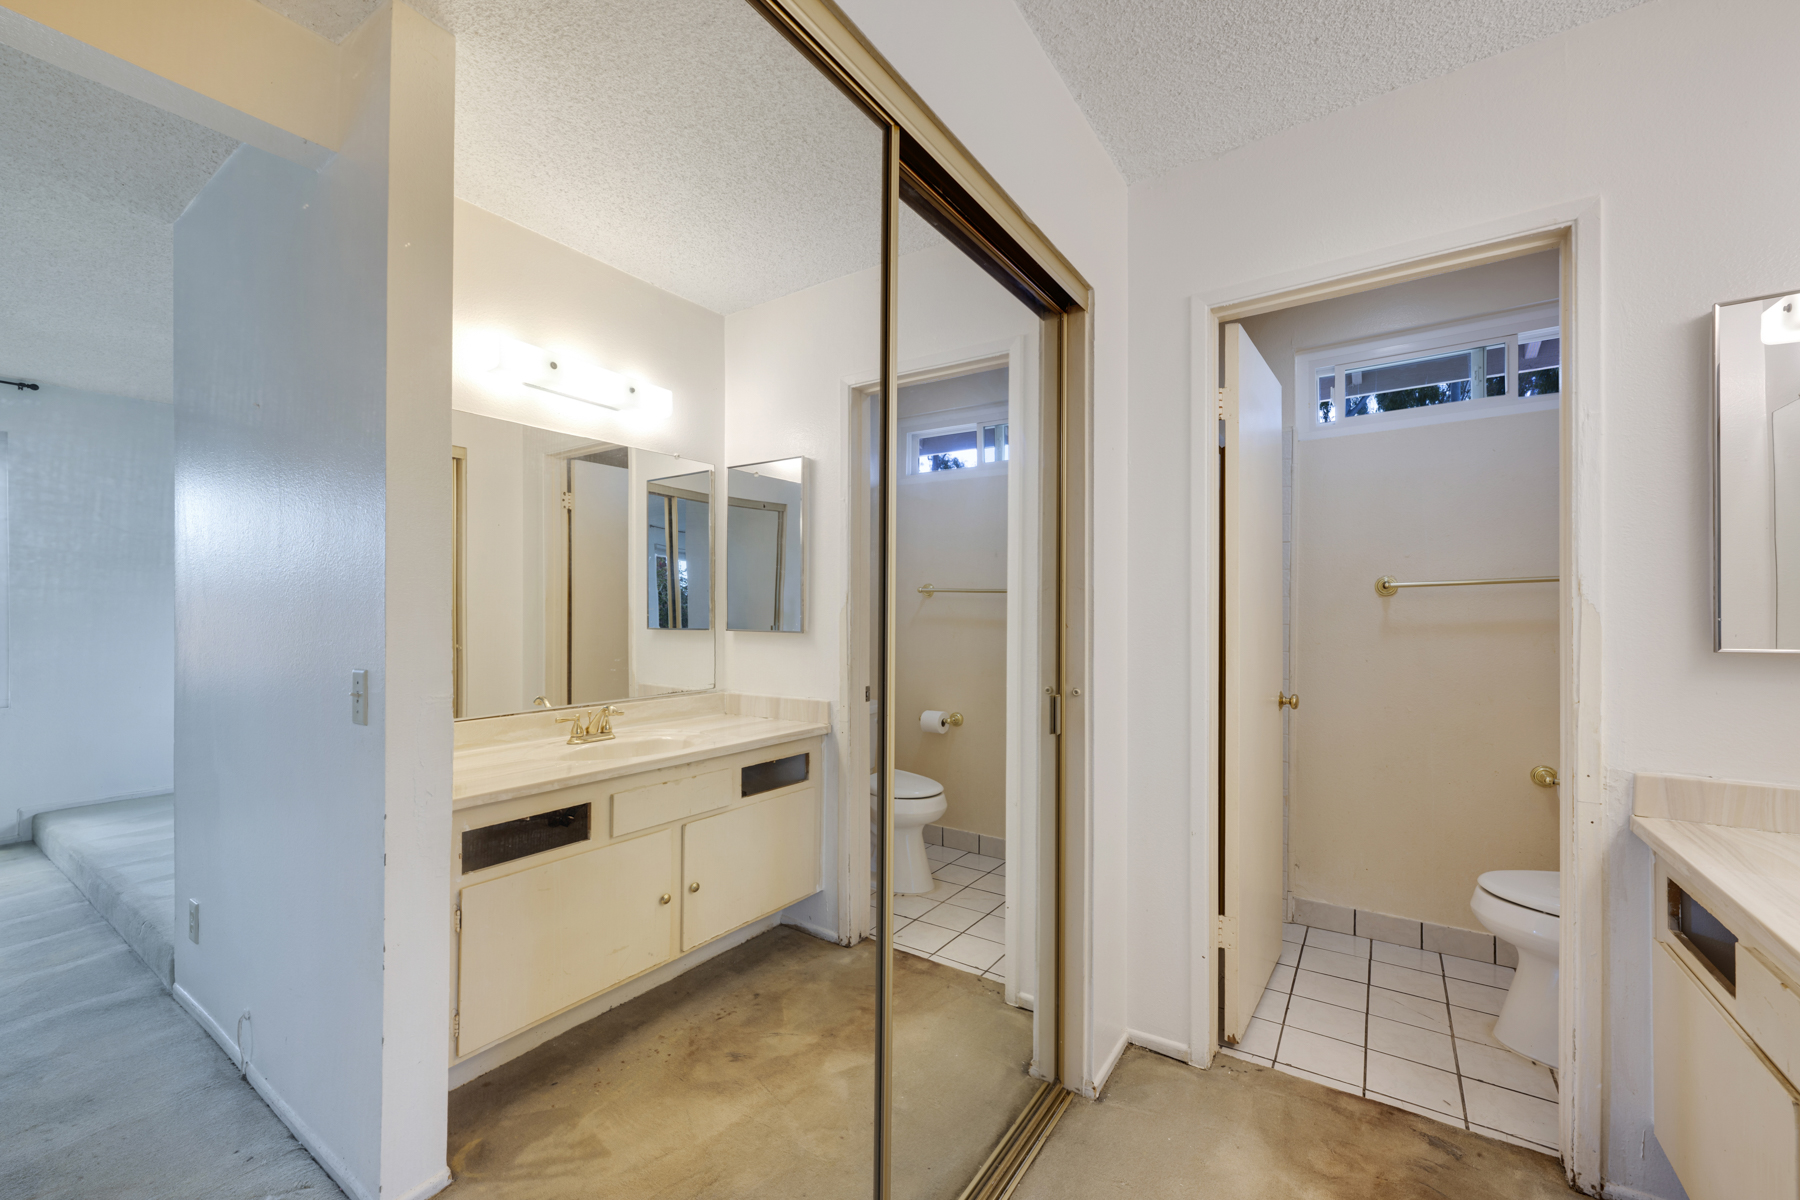 1242 Candlewood Dr-Primary Bathroom-2